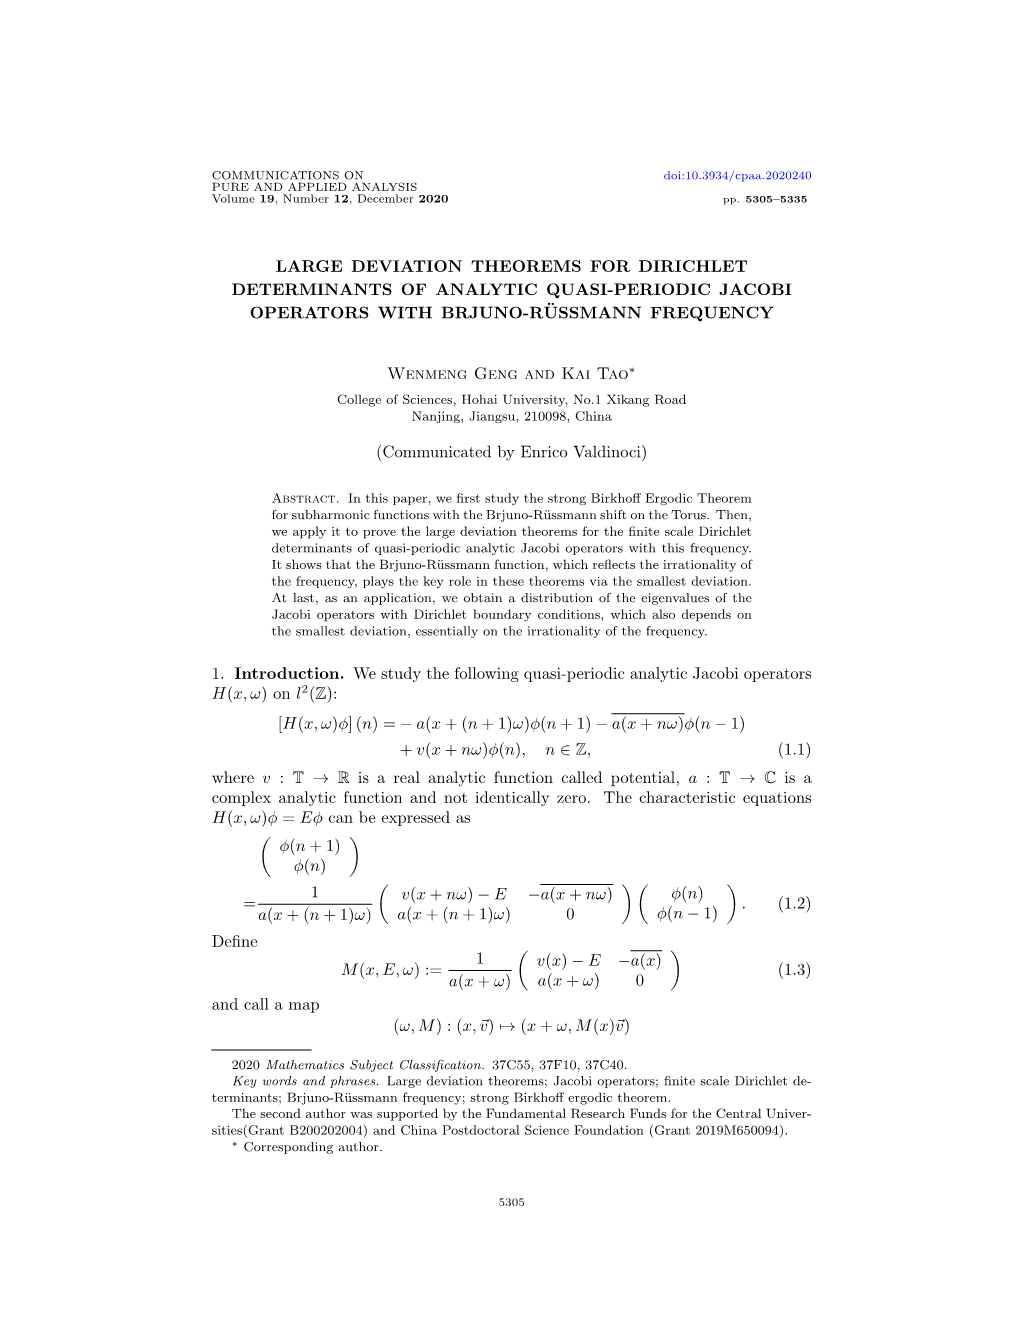 Large Deviation Theorems for Dirichlet Determinants of Analytic Quasi-Periodic Jacobi Operators with Brjuno-Russmann¨ Frequency